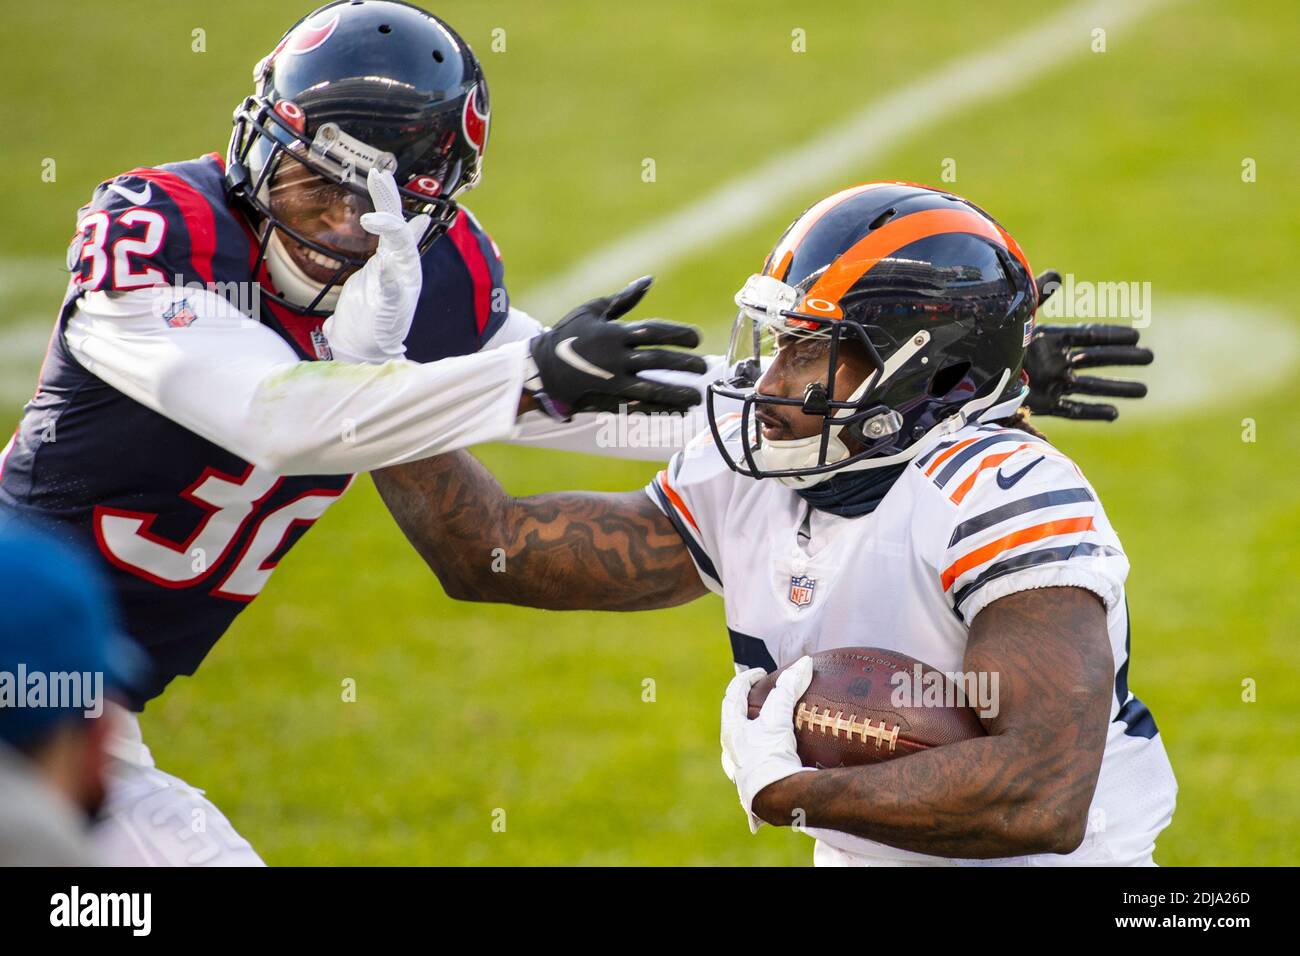 Chicago, Illinois, USA. 13th Dec, 2020. - Bears #84 Cordarrelle Patterson  stiff arms Texans #32 Lonnie Johnson Jr. during the NFL Game between the  Houston Texans and Chicago Bears at Soldier Field